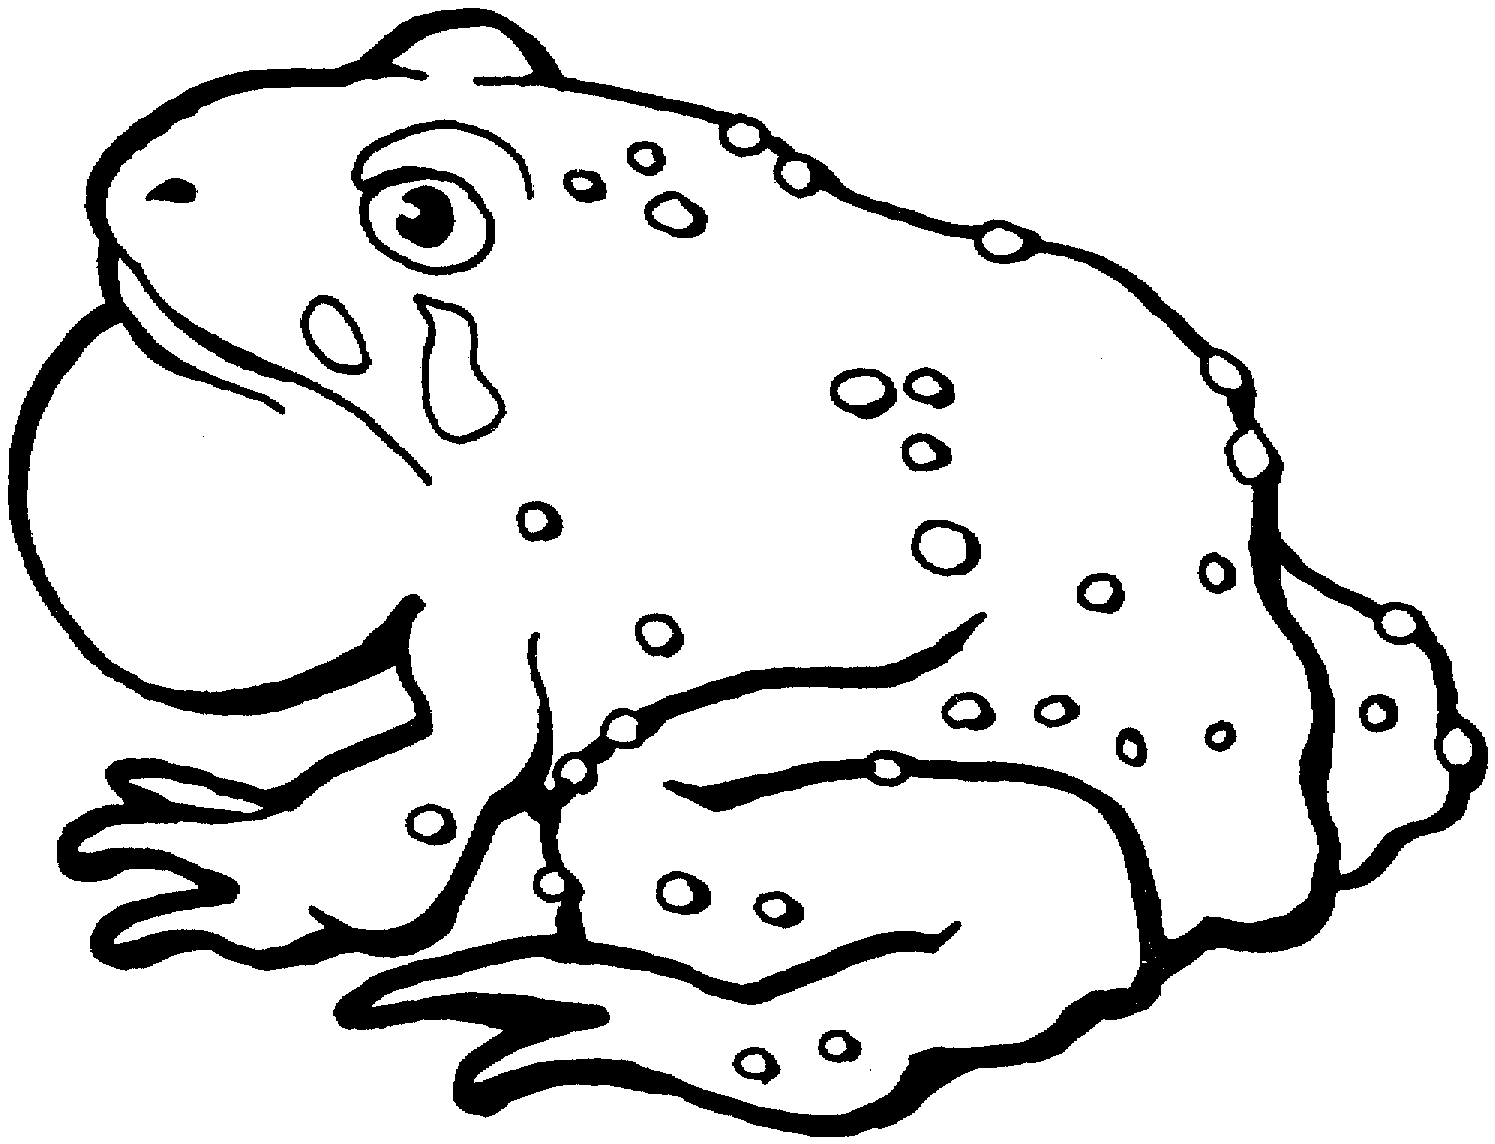 Cane Toad clipart #7, Download drawings